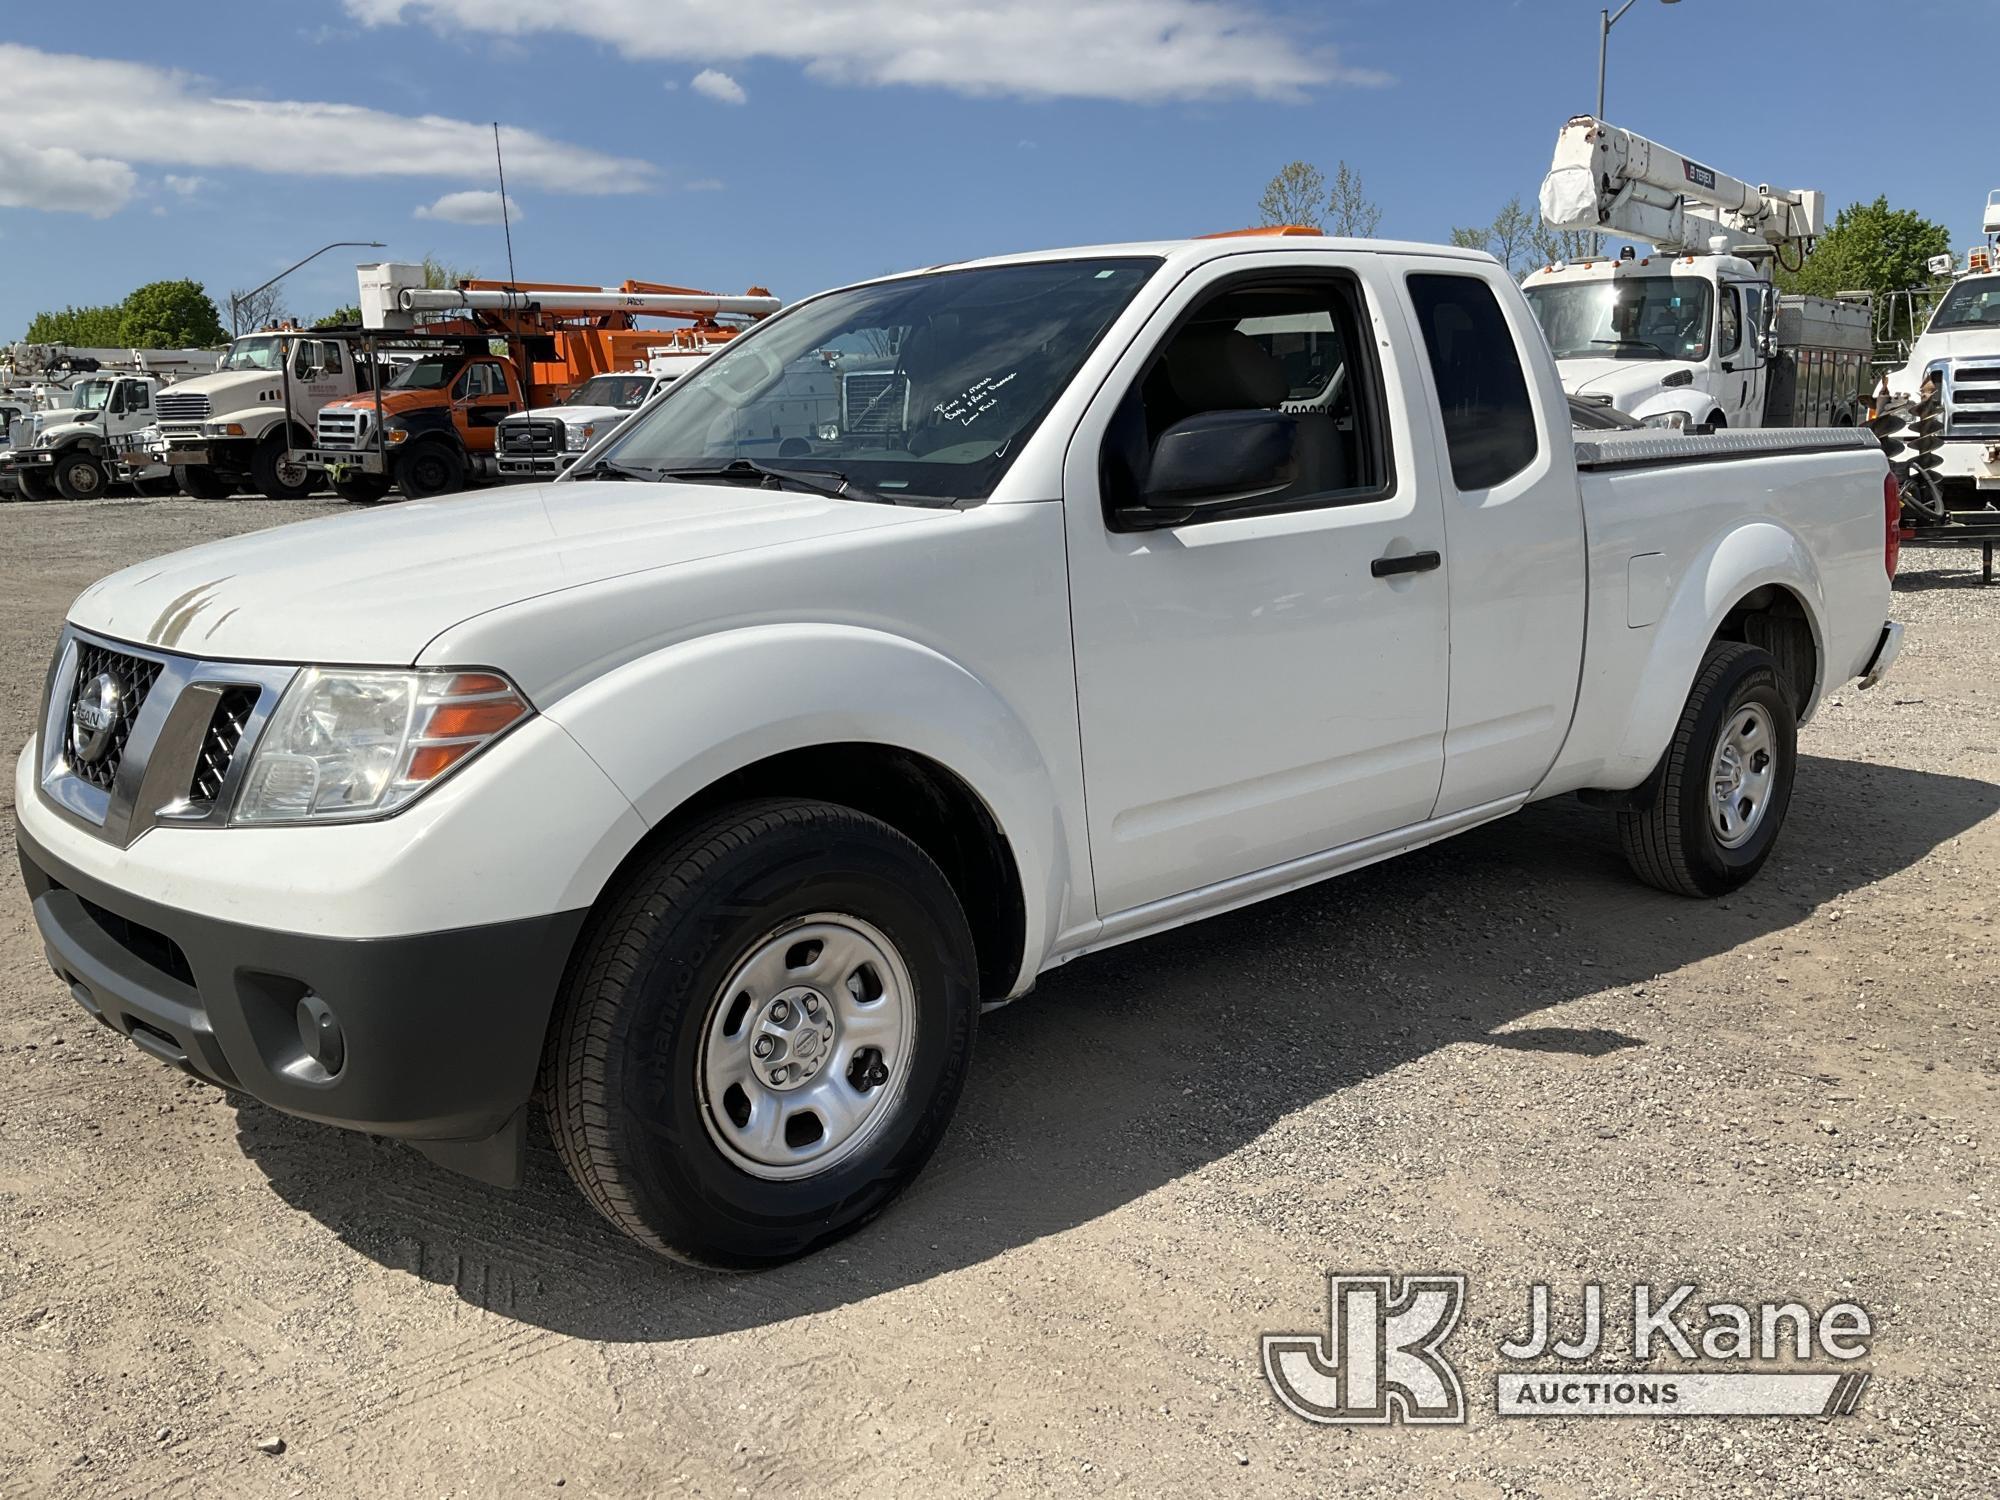 (Plymouth Meeting, PA) 2018 Nissan Frontier Extended-Cab Pickup Truck Runs & Moves, Body & Rust Dama